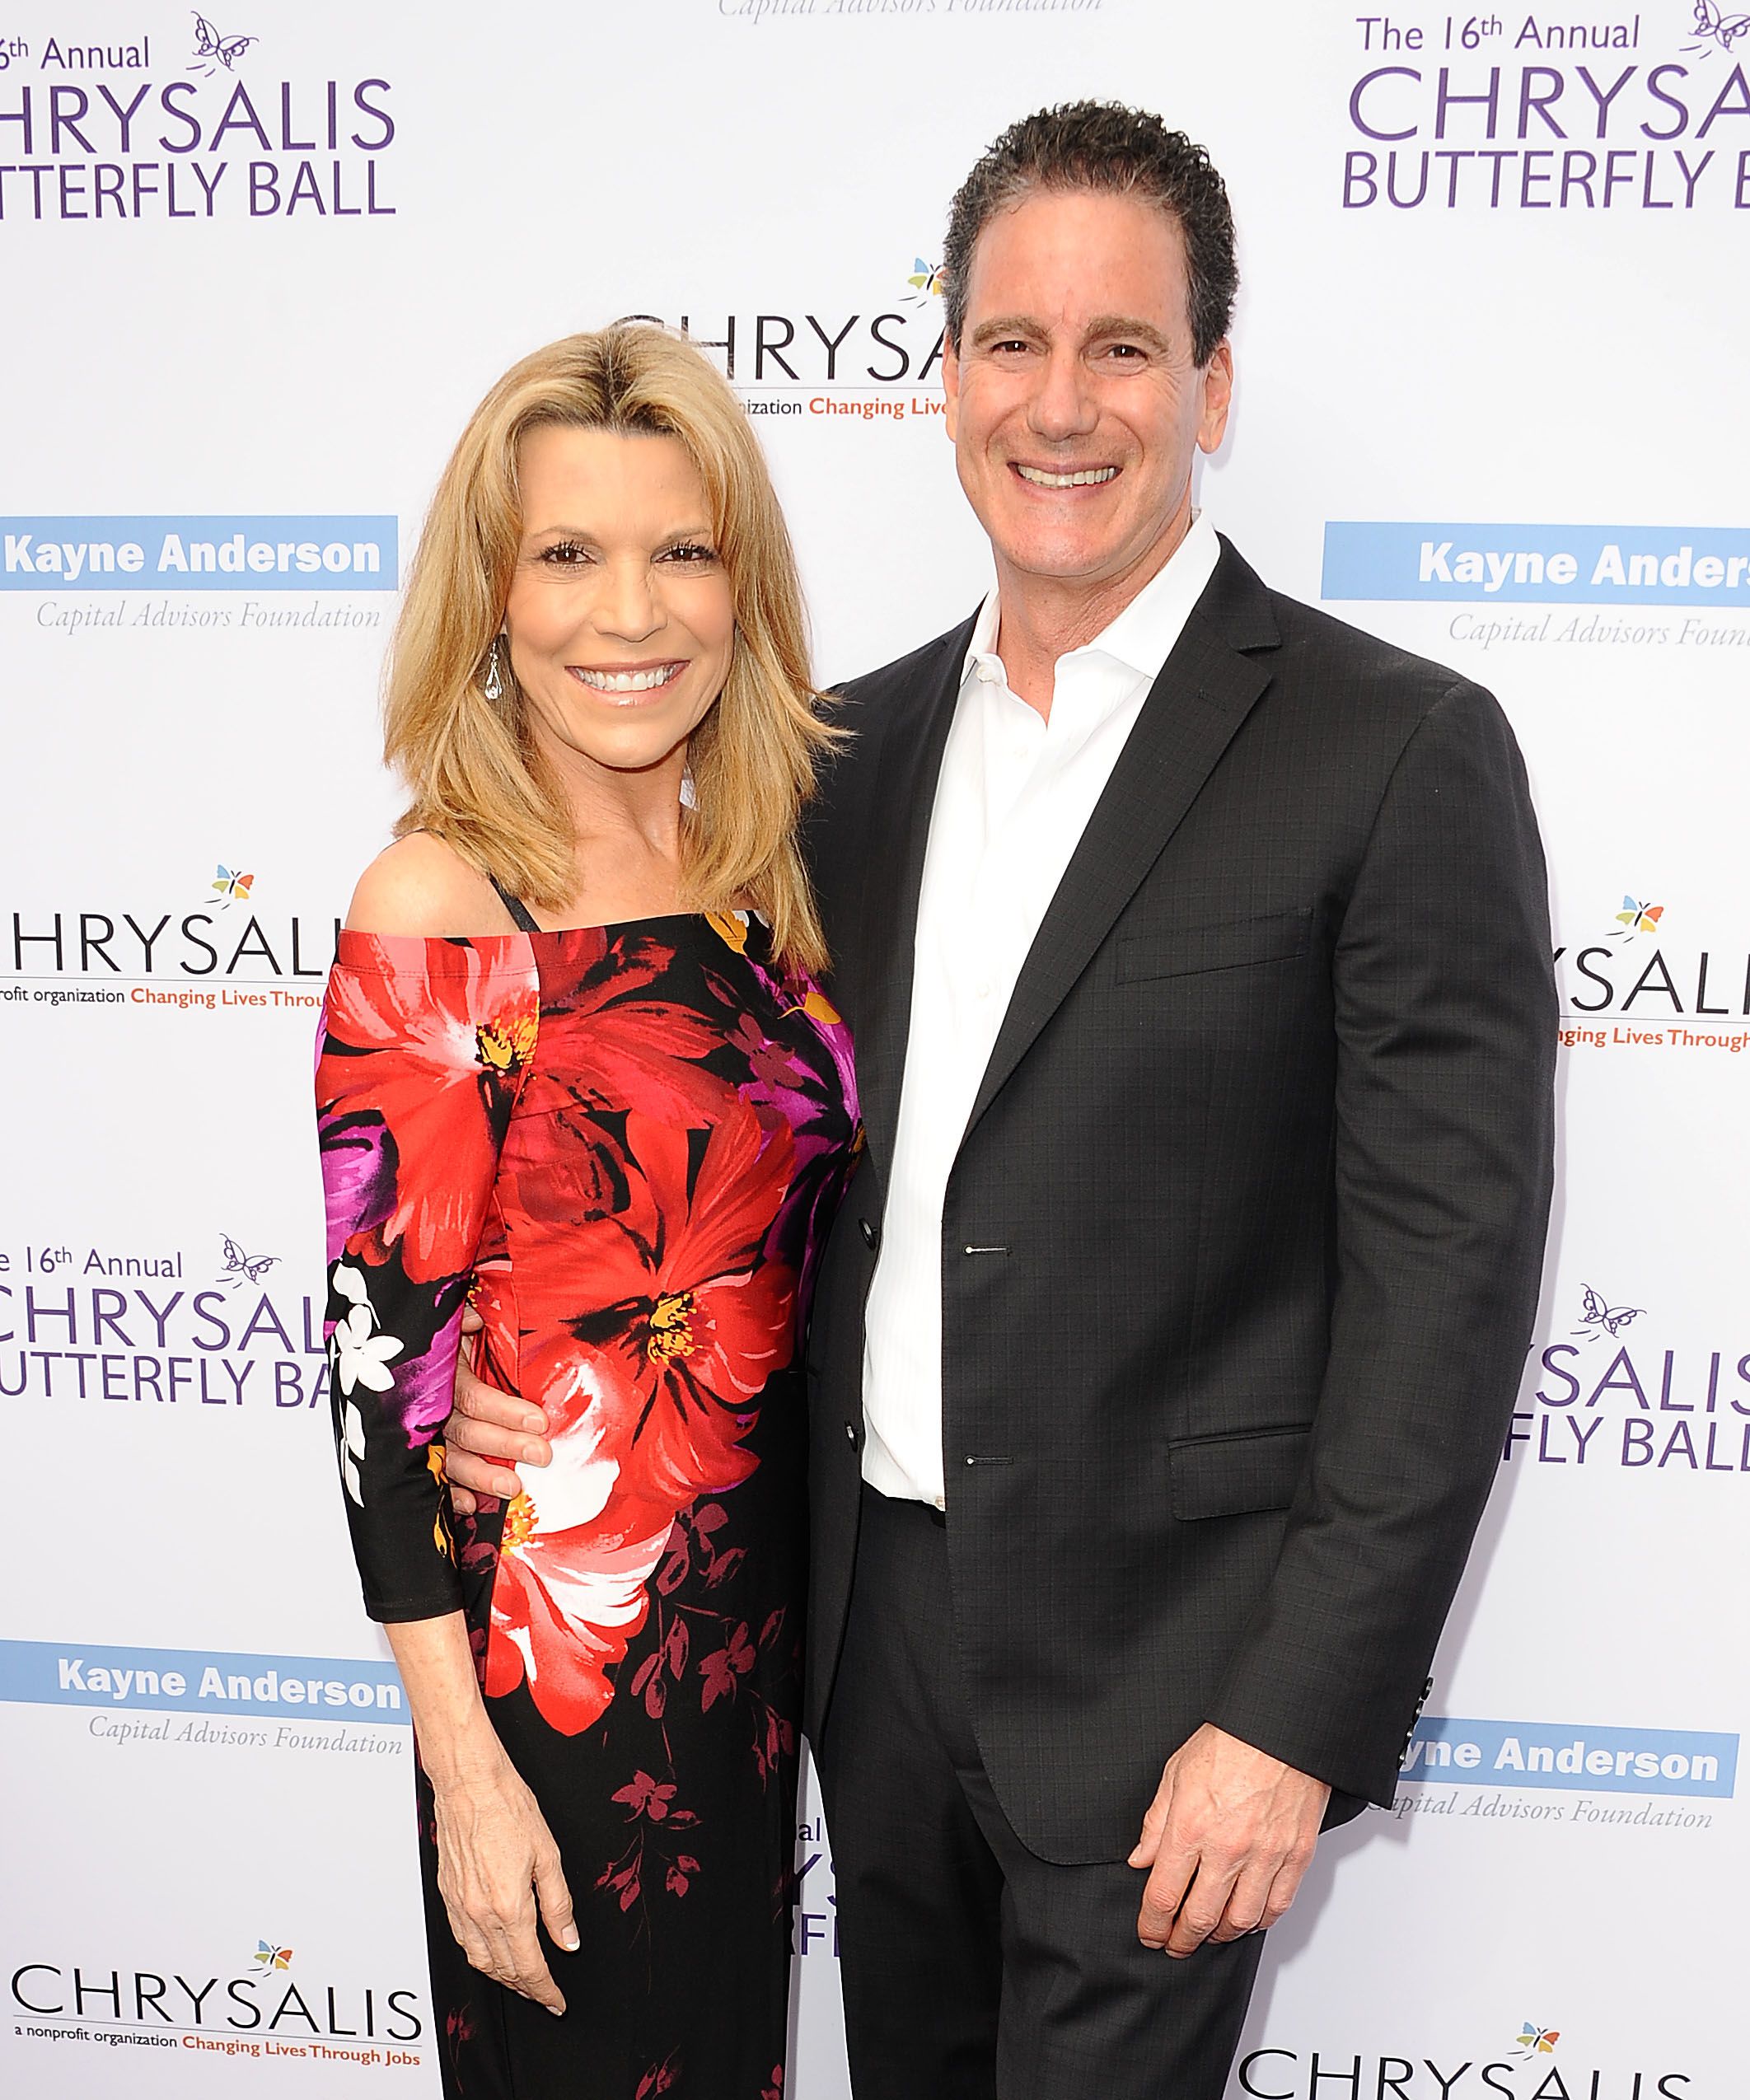 Vanna White and John Donaldson at the 16th annual Chrysalis Butterfly Ball on June 3, 2017 | Photo: Getty Images